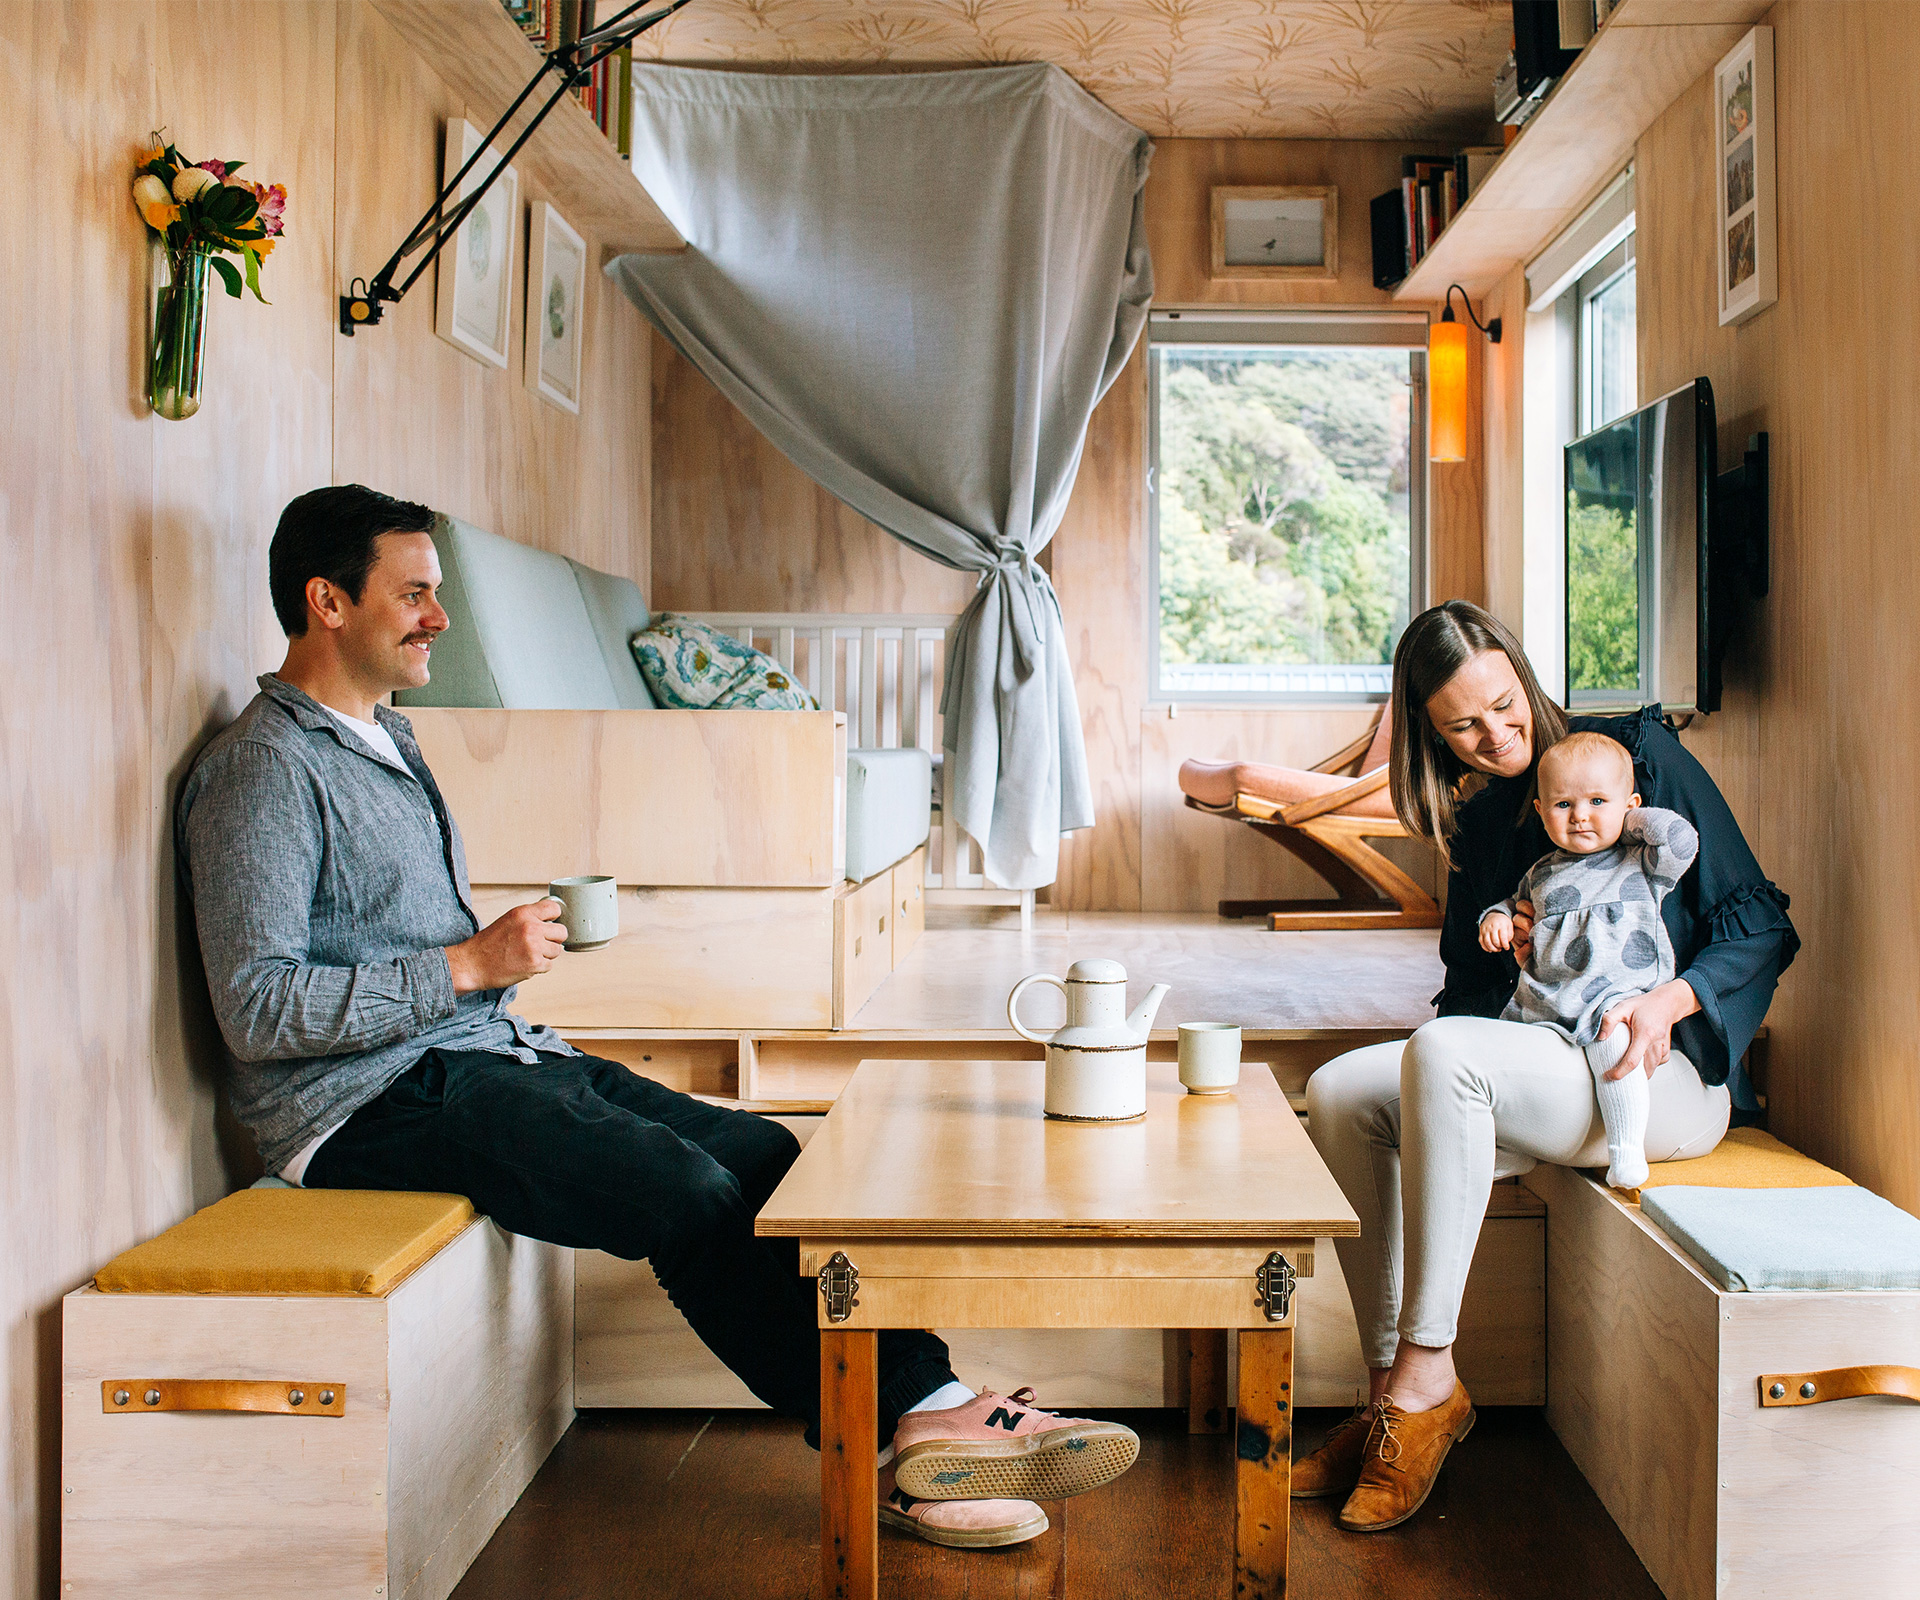 This couple gets honest about what it's like to live in a shipping container